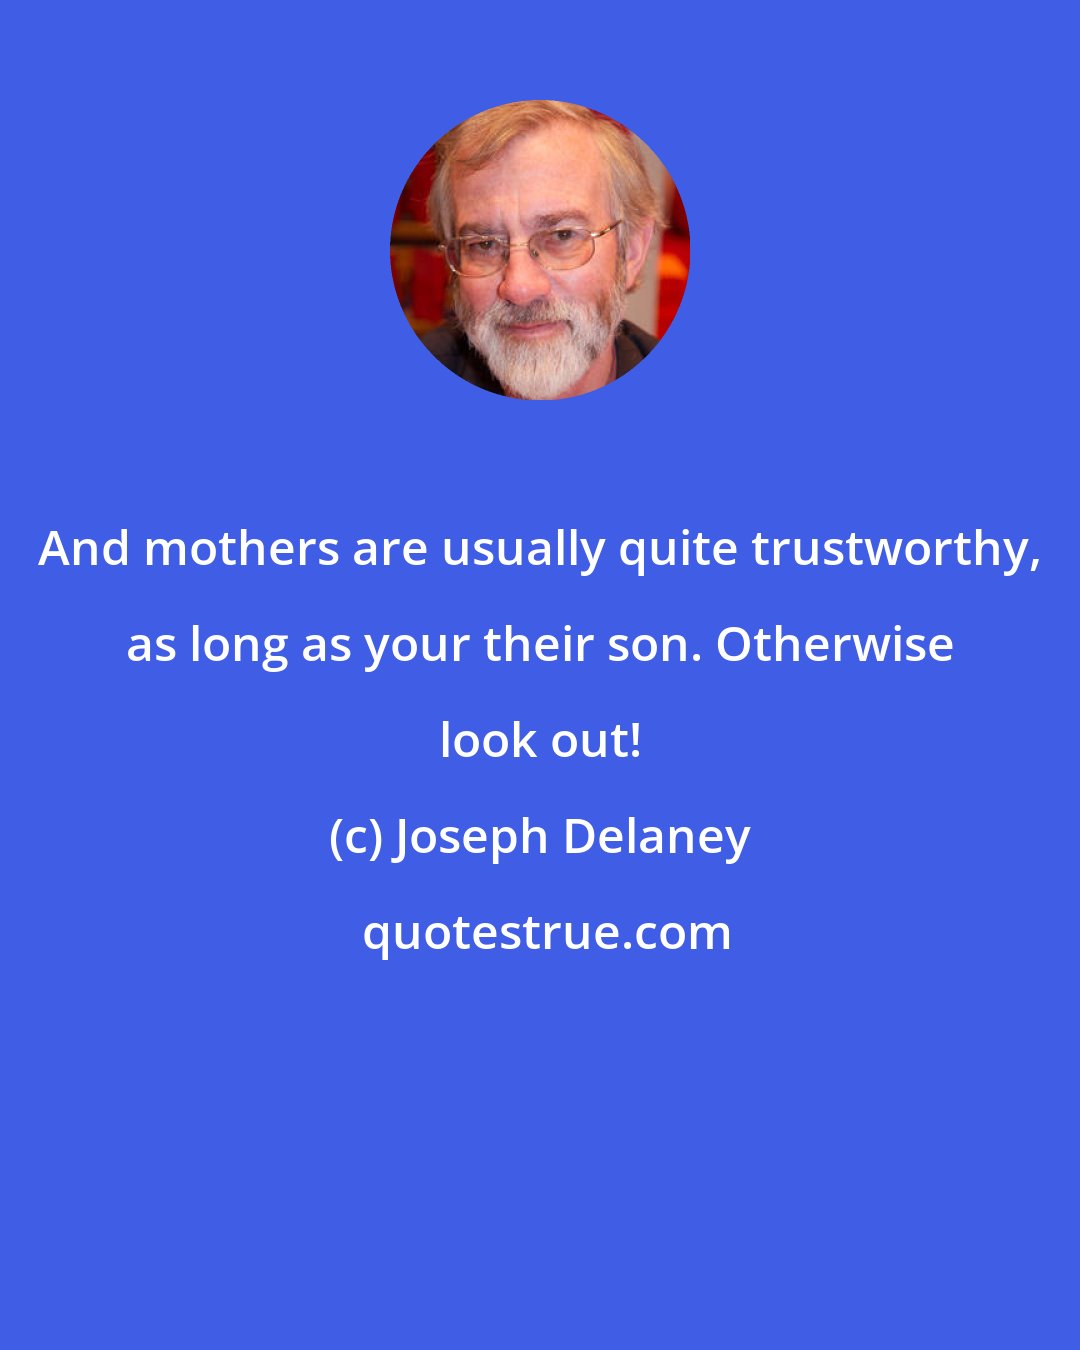 Joseph Delaney: And mothers are usually quite trustworthy, as long as your their son. Otherwise look out!